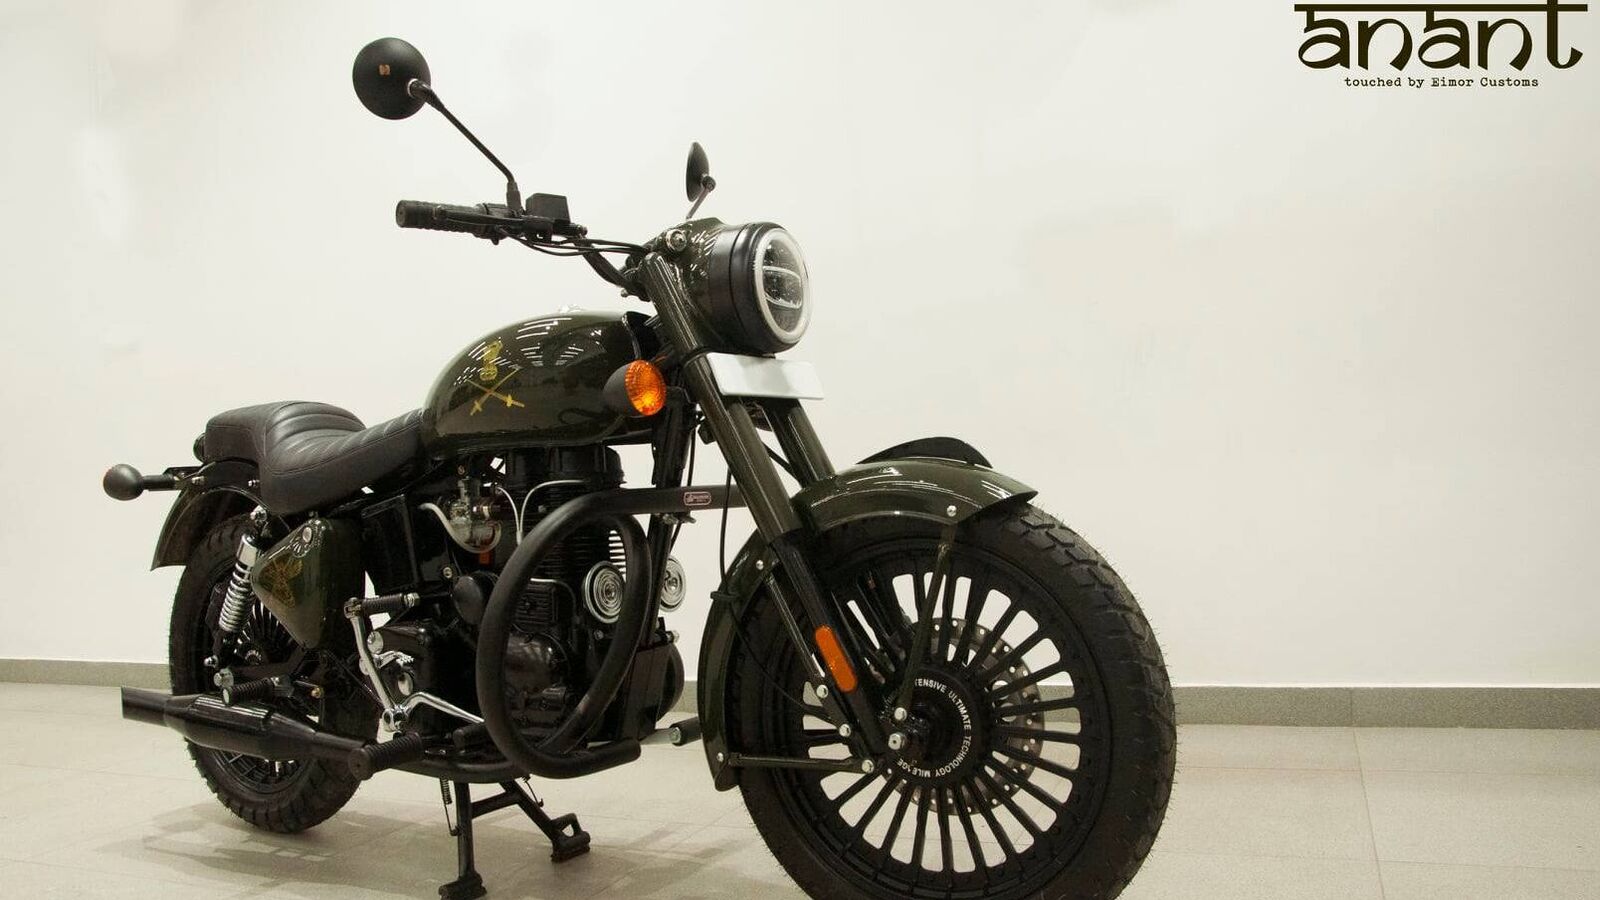 In pics: Royal Enfield Bullet 350 modified to honour the Indian ...